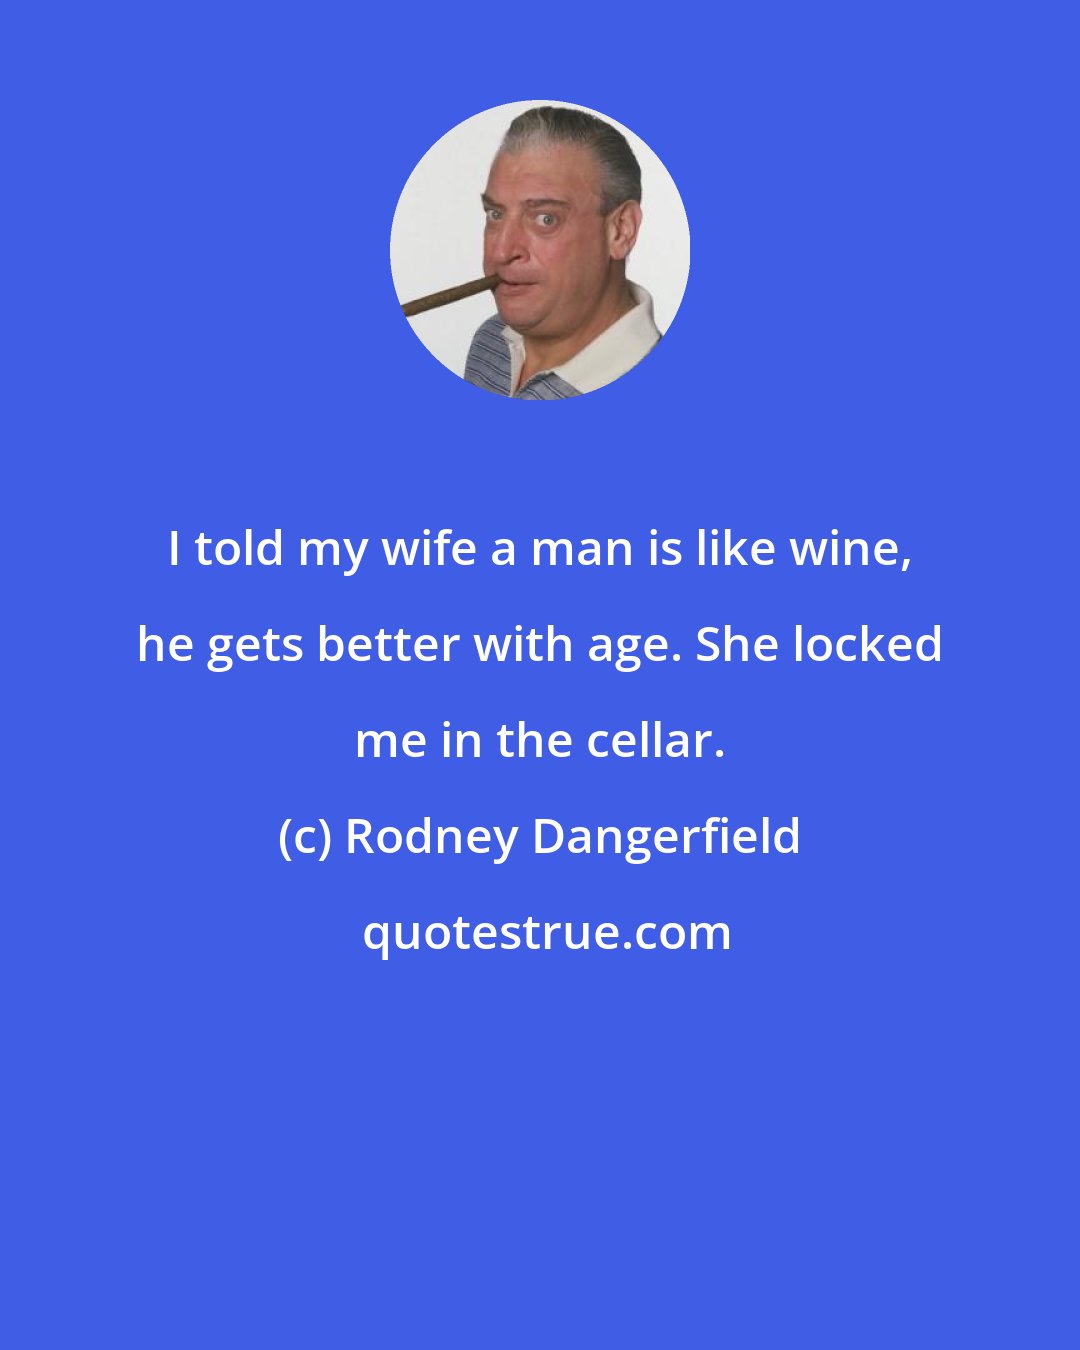 Rodney Dangerfield: I told my wife a man is like wine, he gets better with age. She locked me in the cellar.